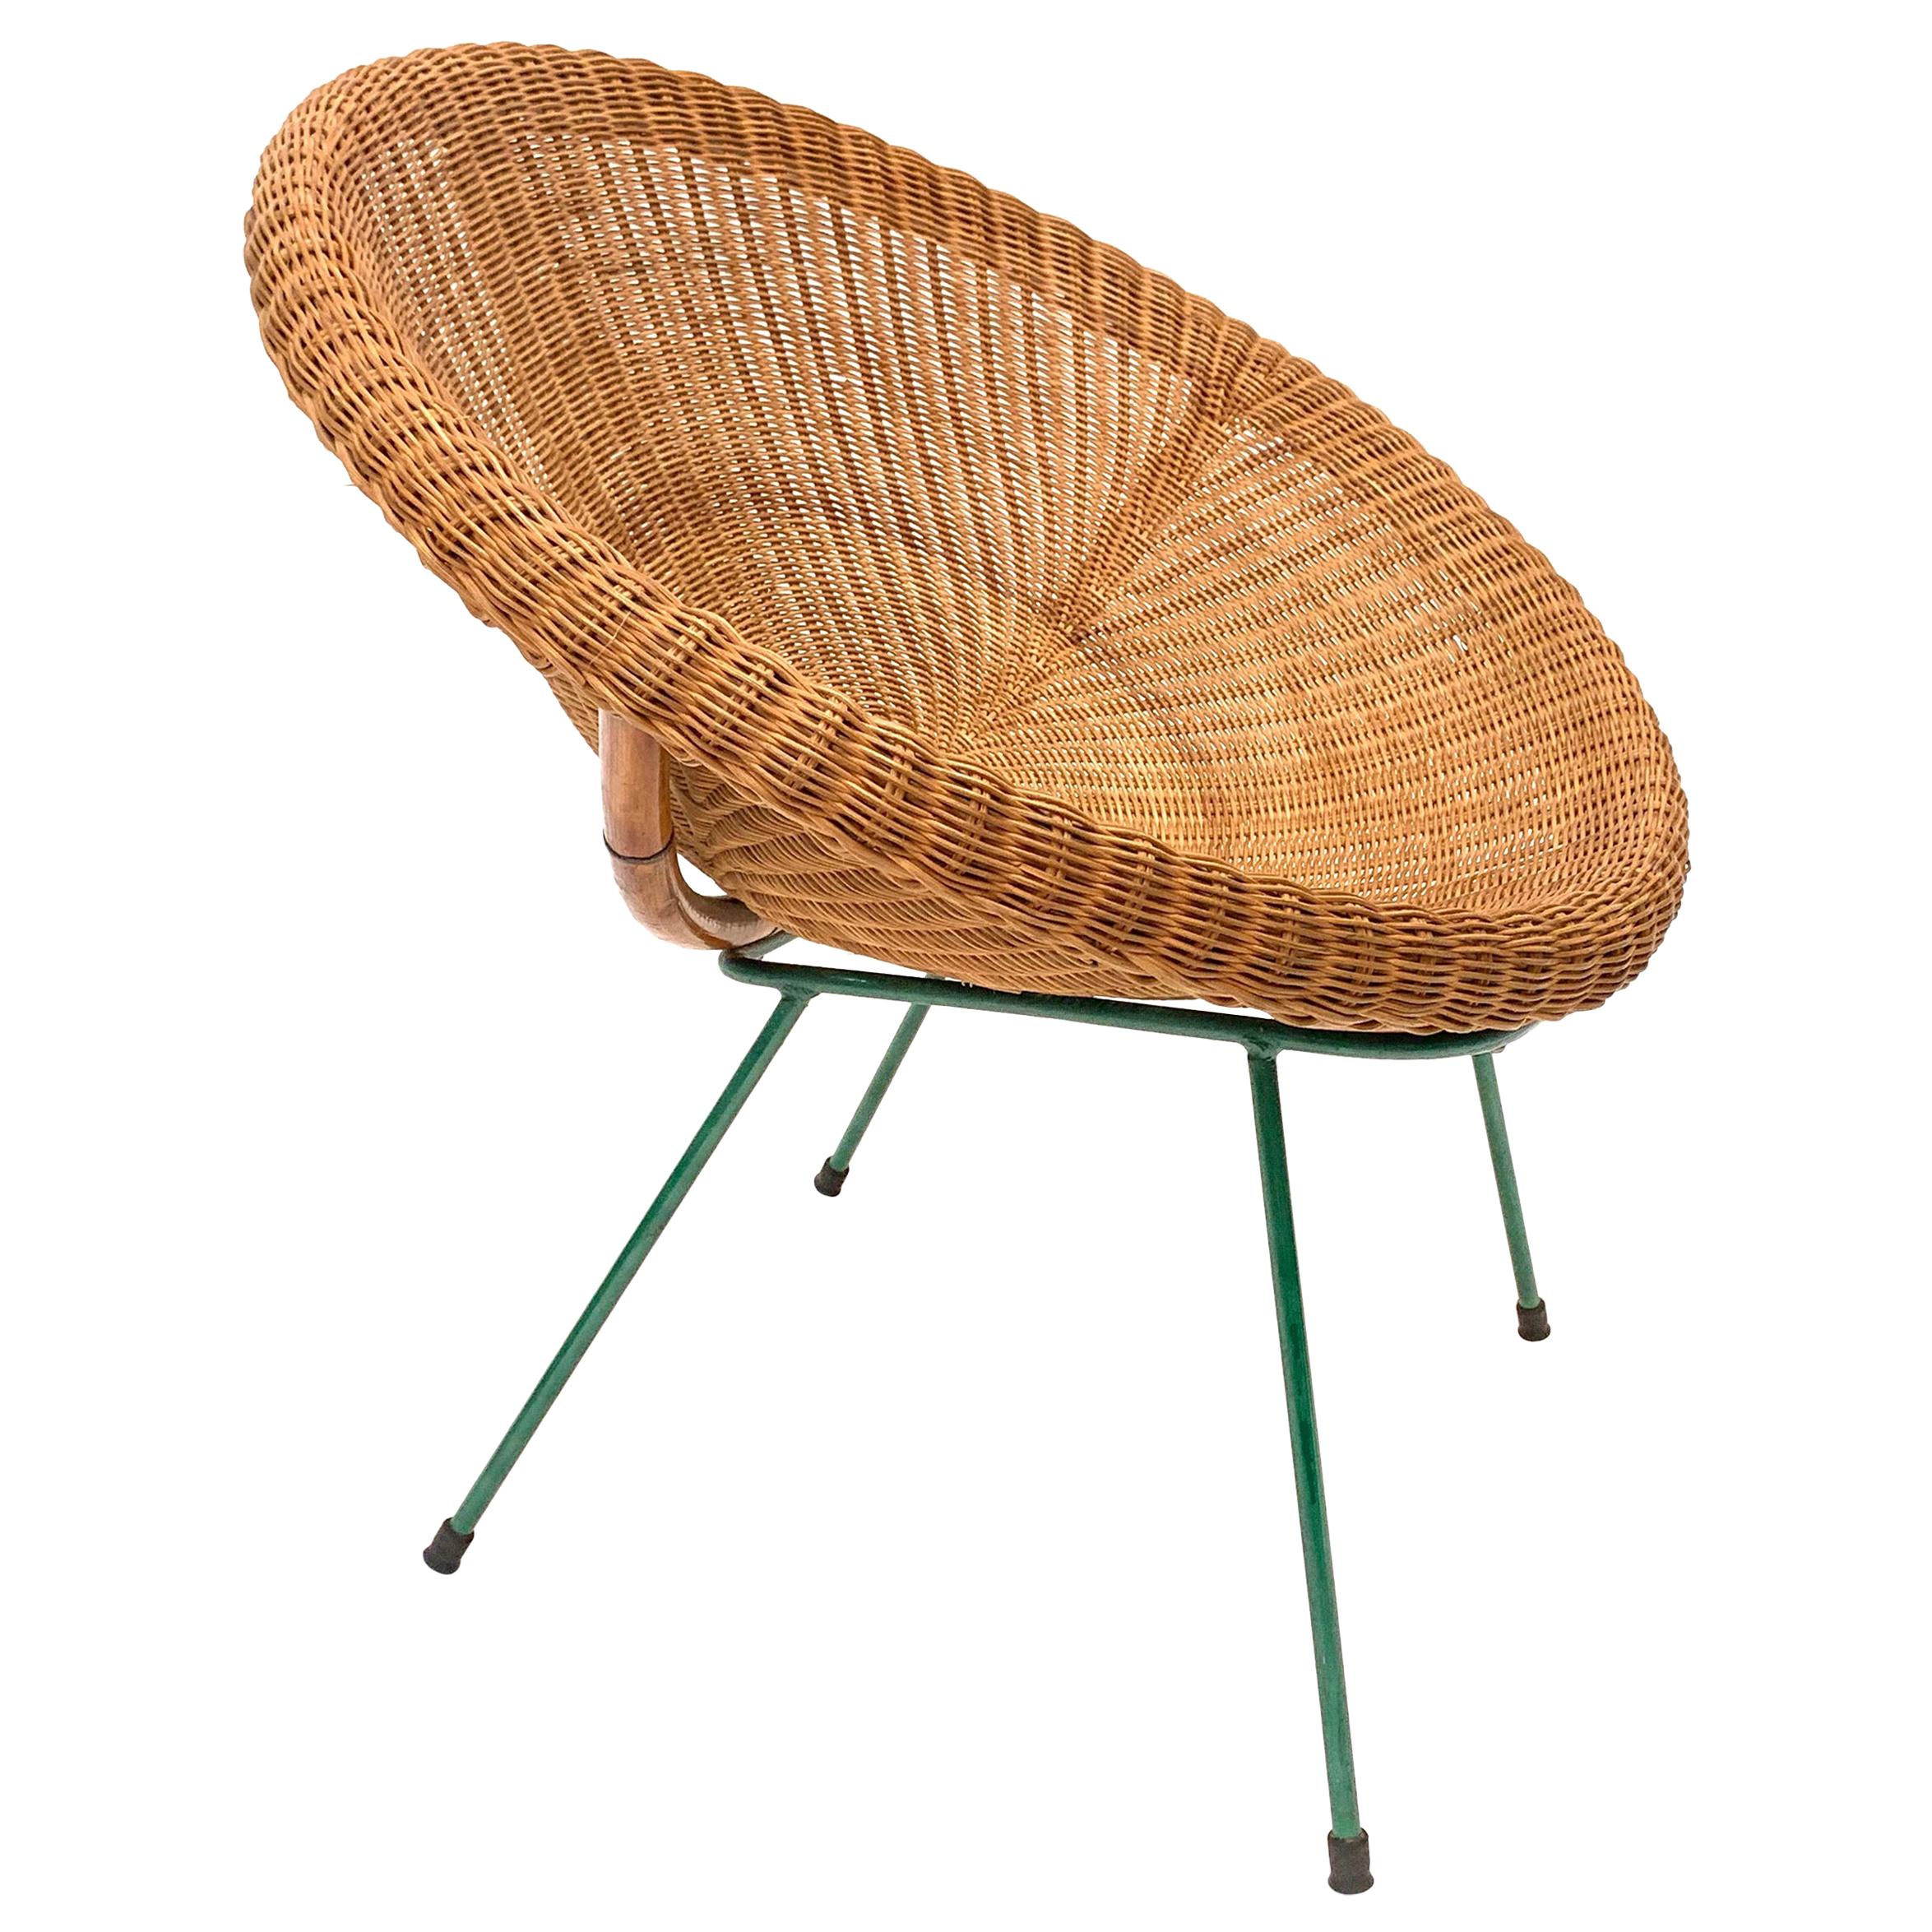 Midcentury Italian Rattan and Bamboo Shell Armchair with Green Metal Legs, 1950s